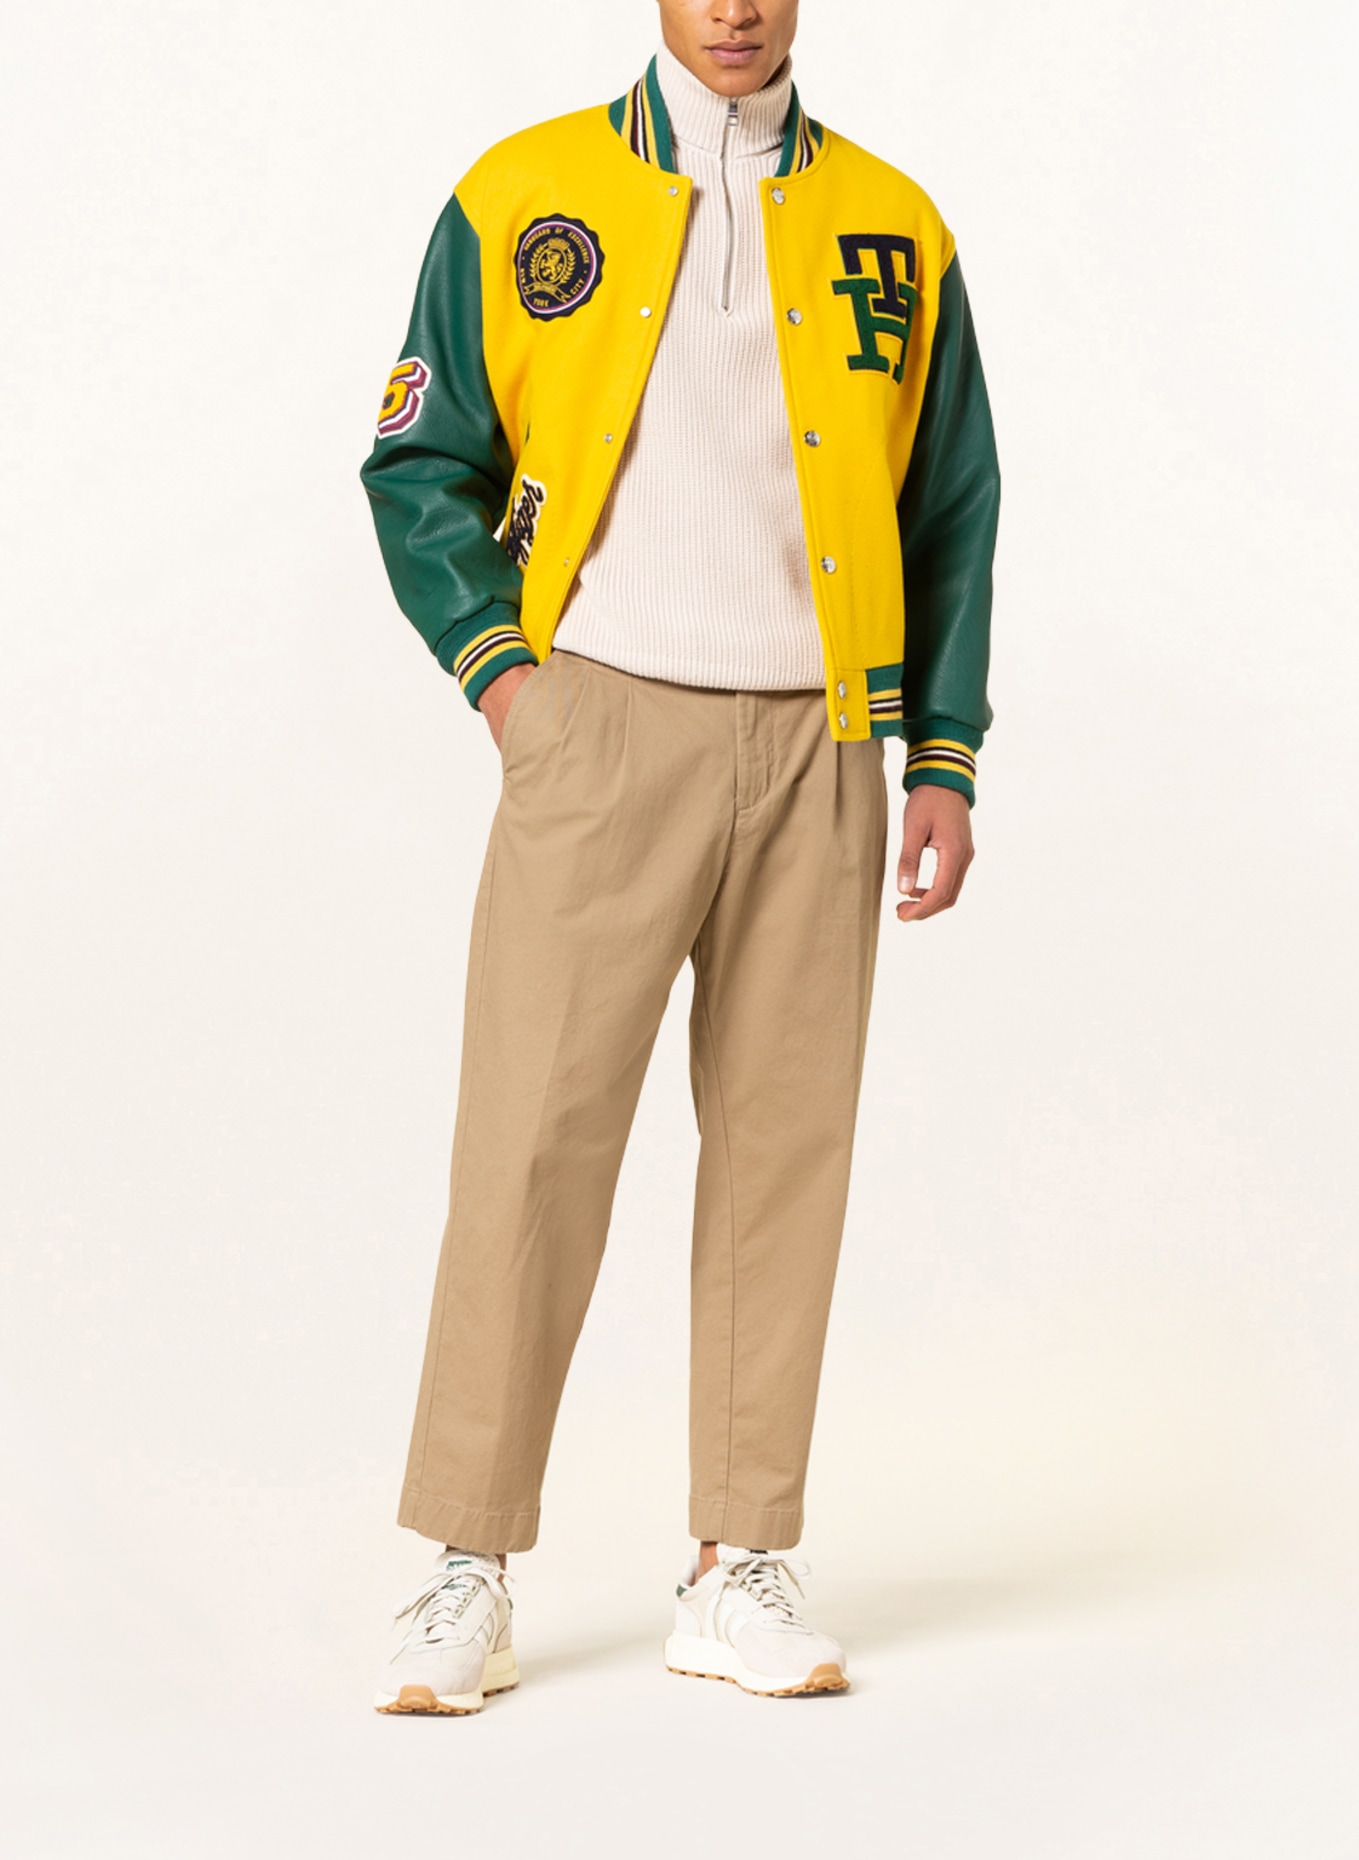 TOMMY Bomber jacket in mixed materials in yellow/ green